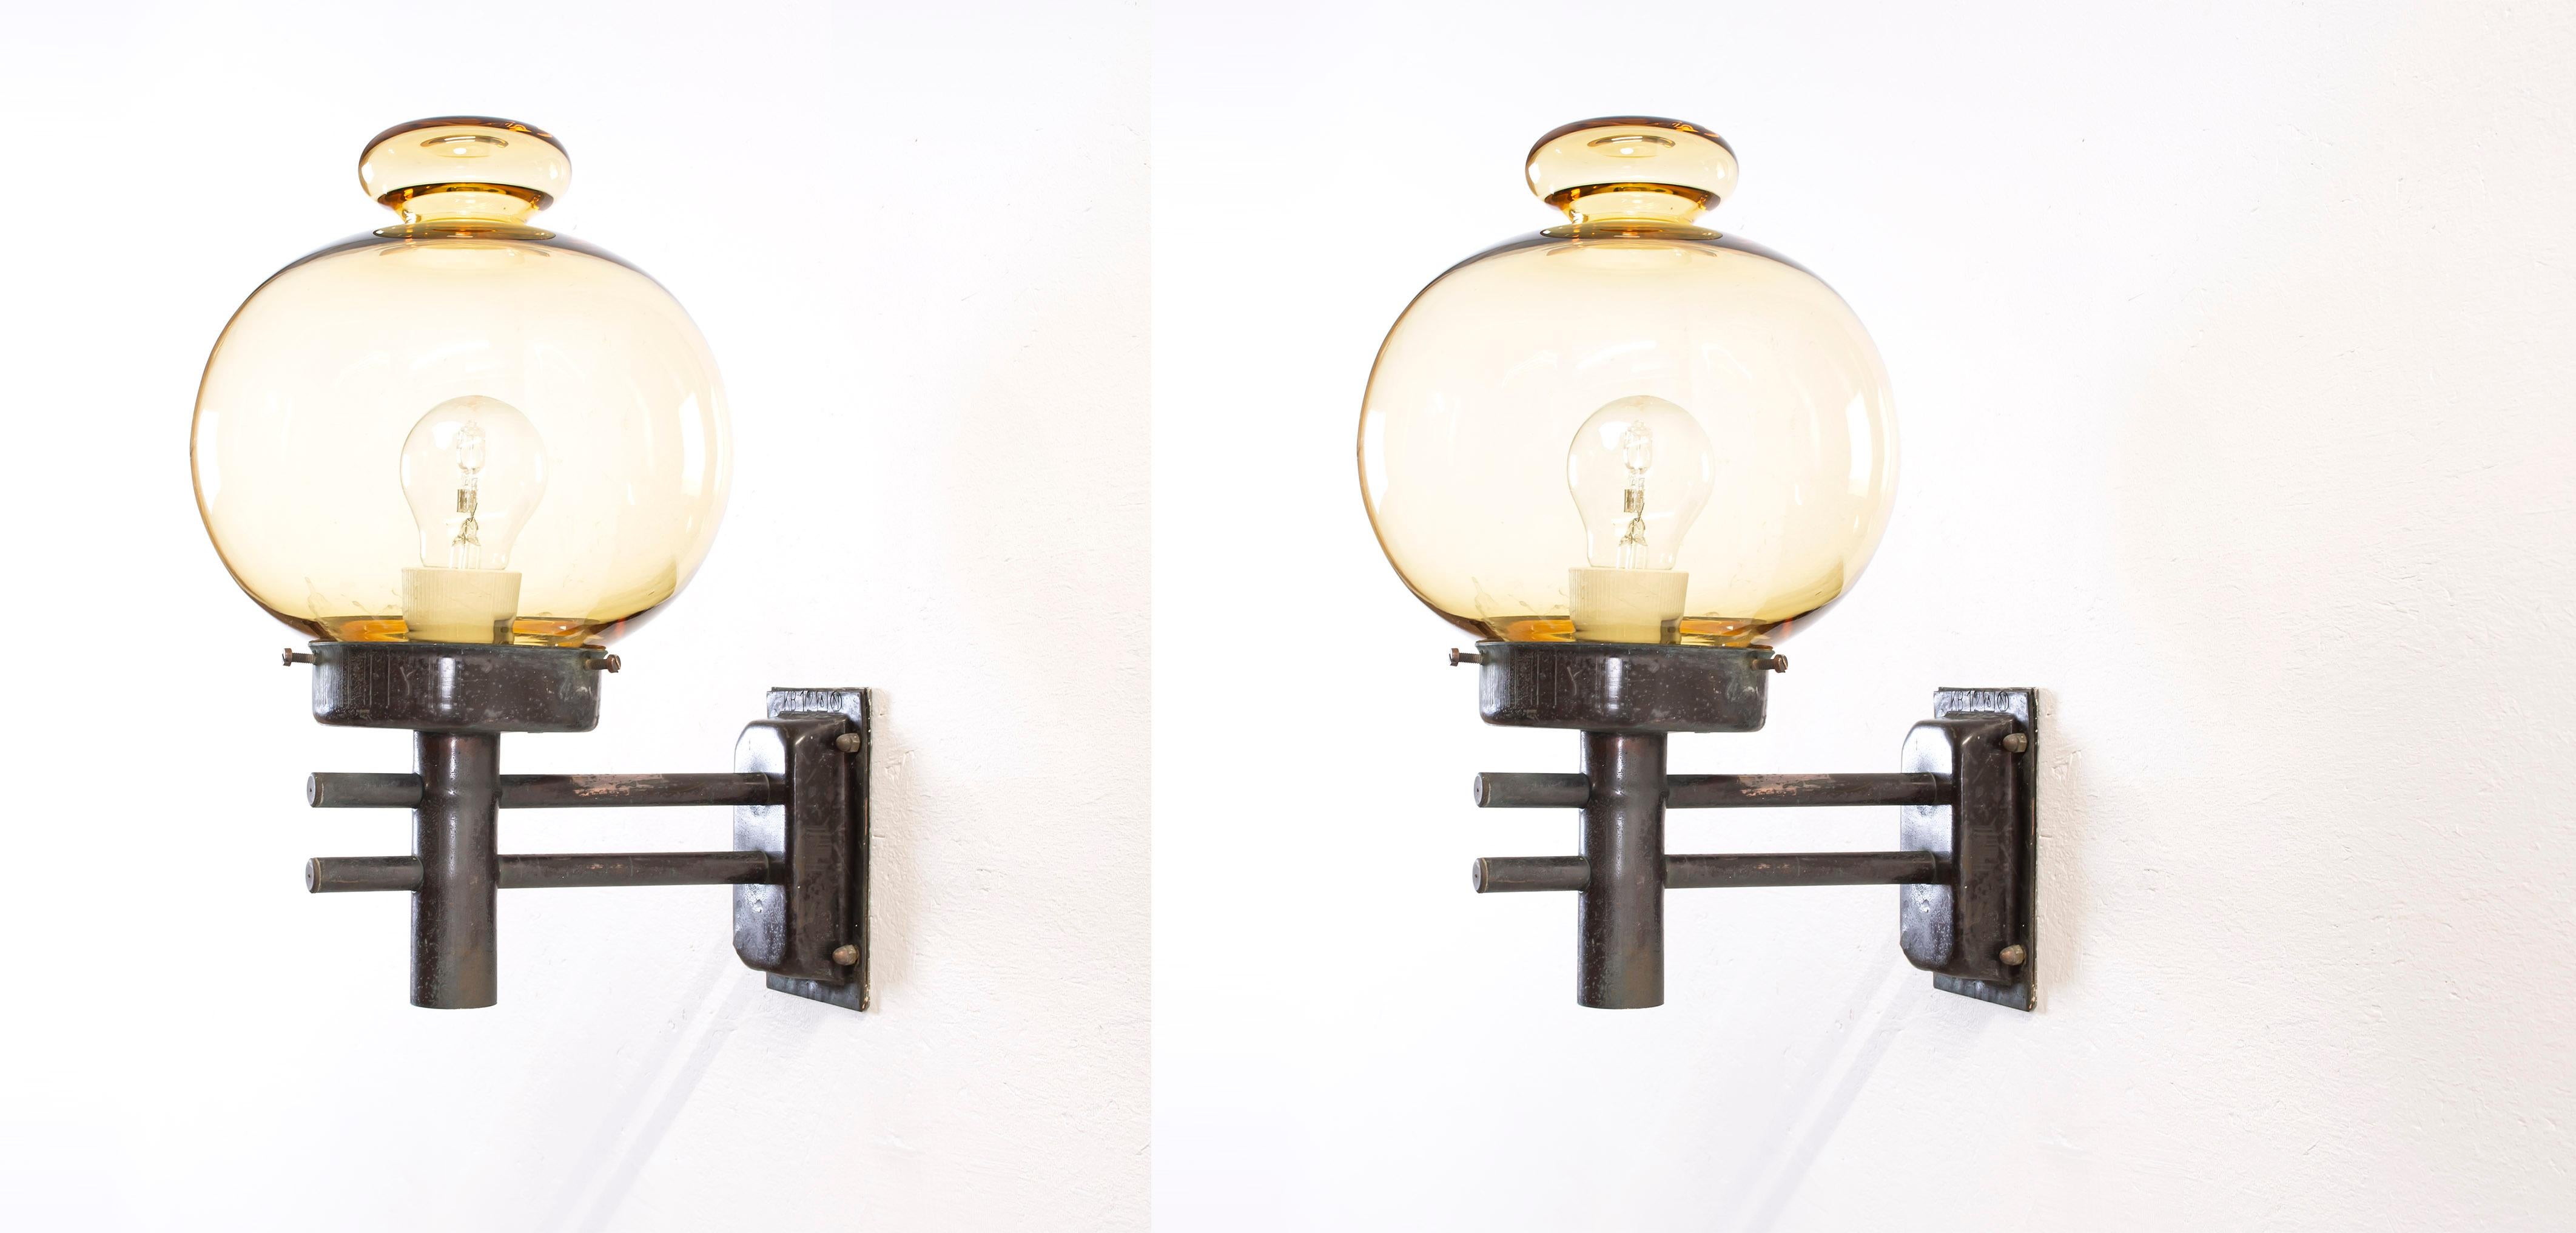 Modernist pair of outdoor wall lamps in copper and glass. Designed and made in Norway from circa 1970s first half. Both lamps are fully working and in very good vintage condition. The lamps are fitted with one E27 bulb holder (works in the US), and